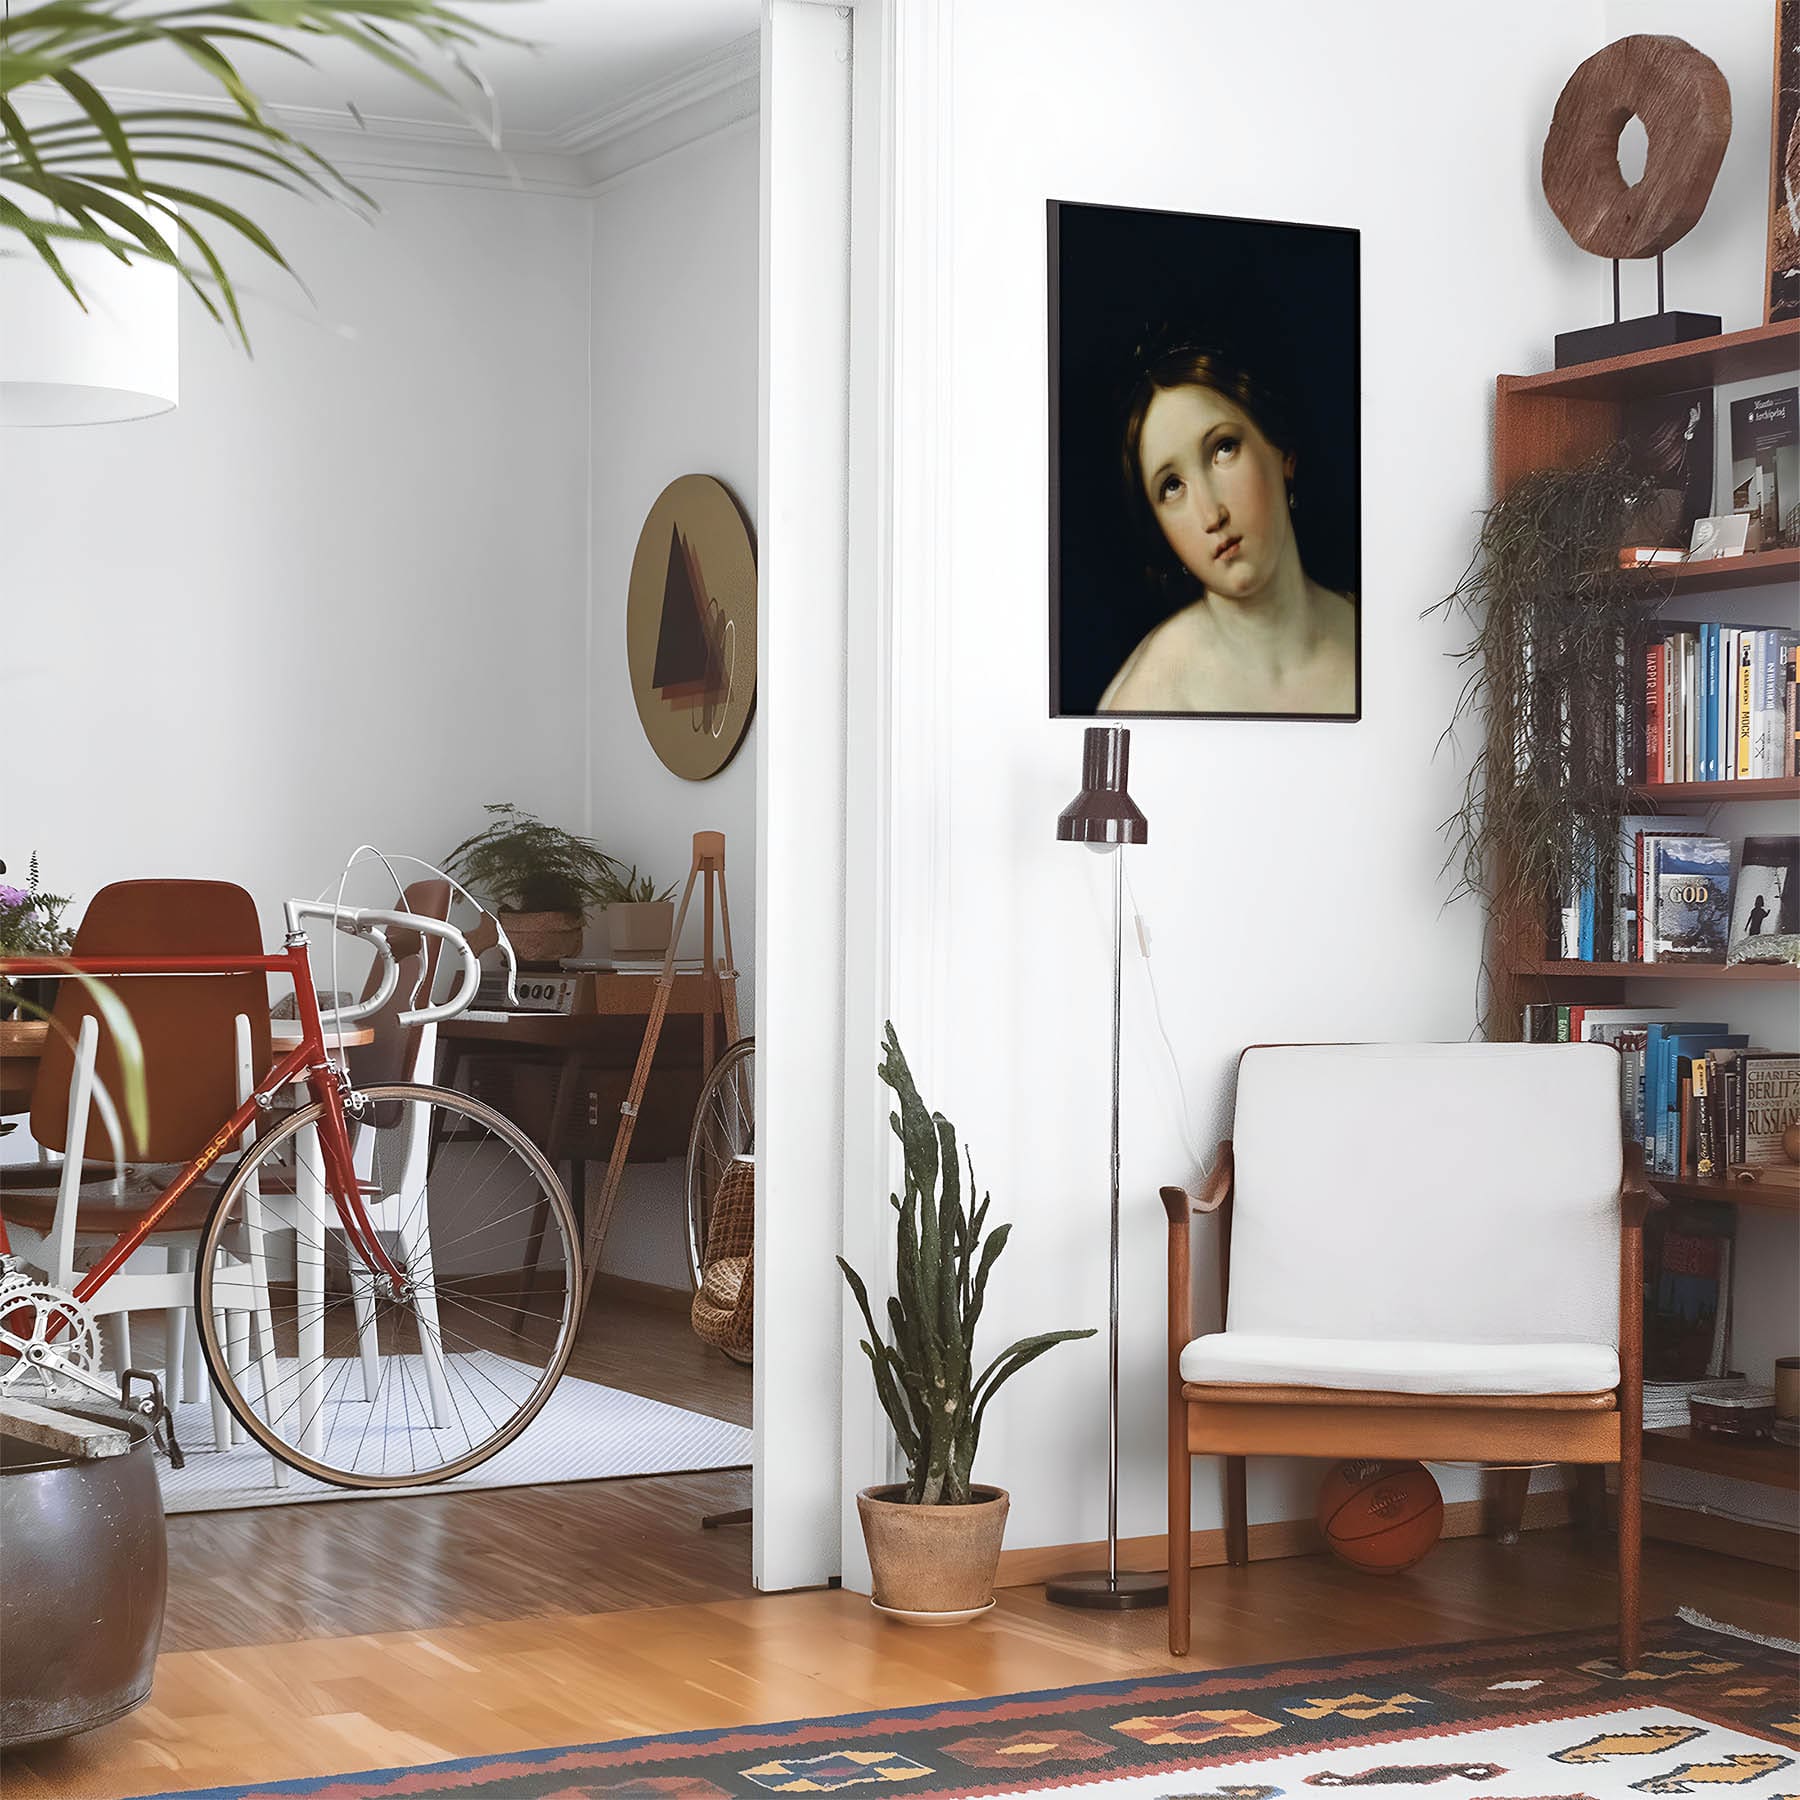 Eclectic living room with a road bike, bookshelf and house plants that features framed artwork of a Aesthetic Dark and Moody above a chair and lamp